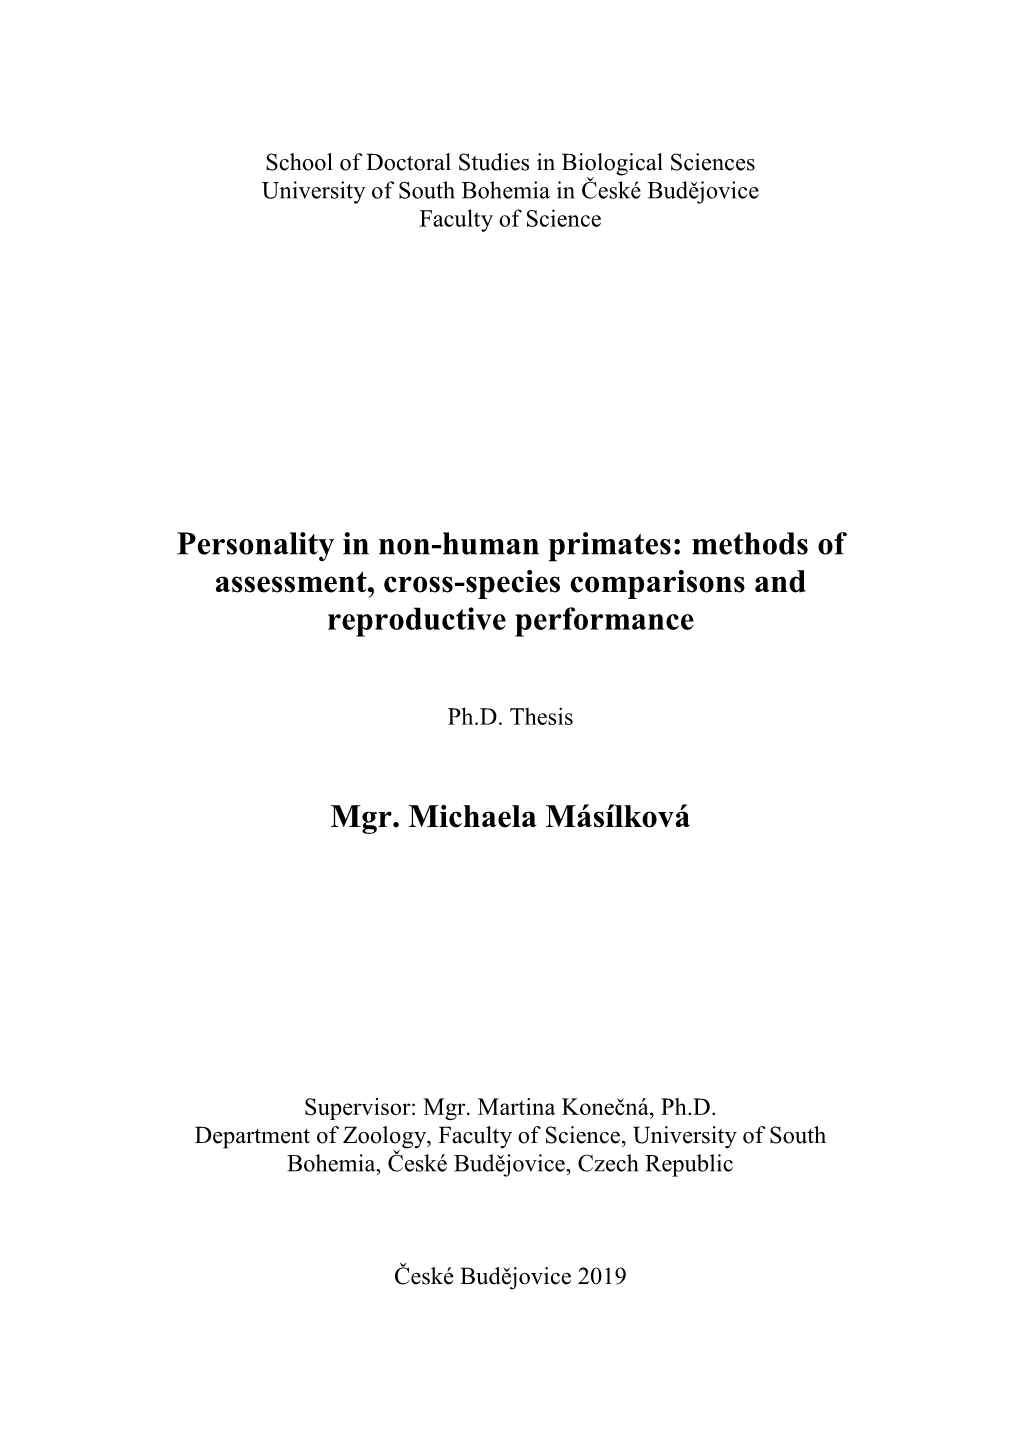 Personality in Non-Human Primates: Methods of Assessment, Cross-Species Comparisons and Reproductive Performance